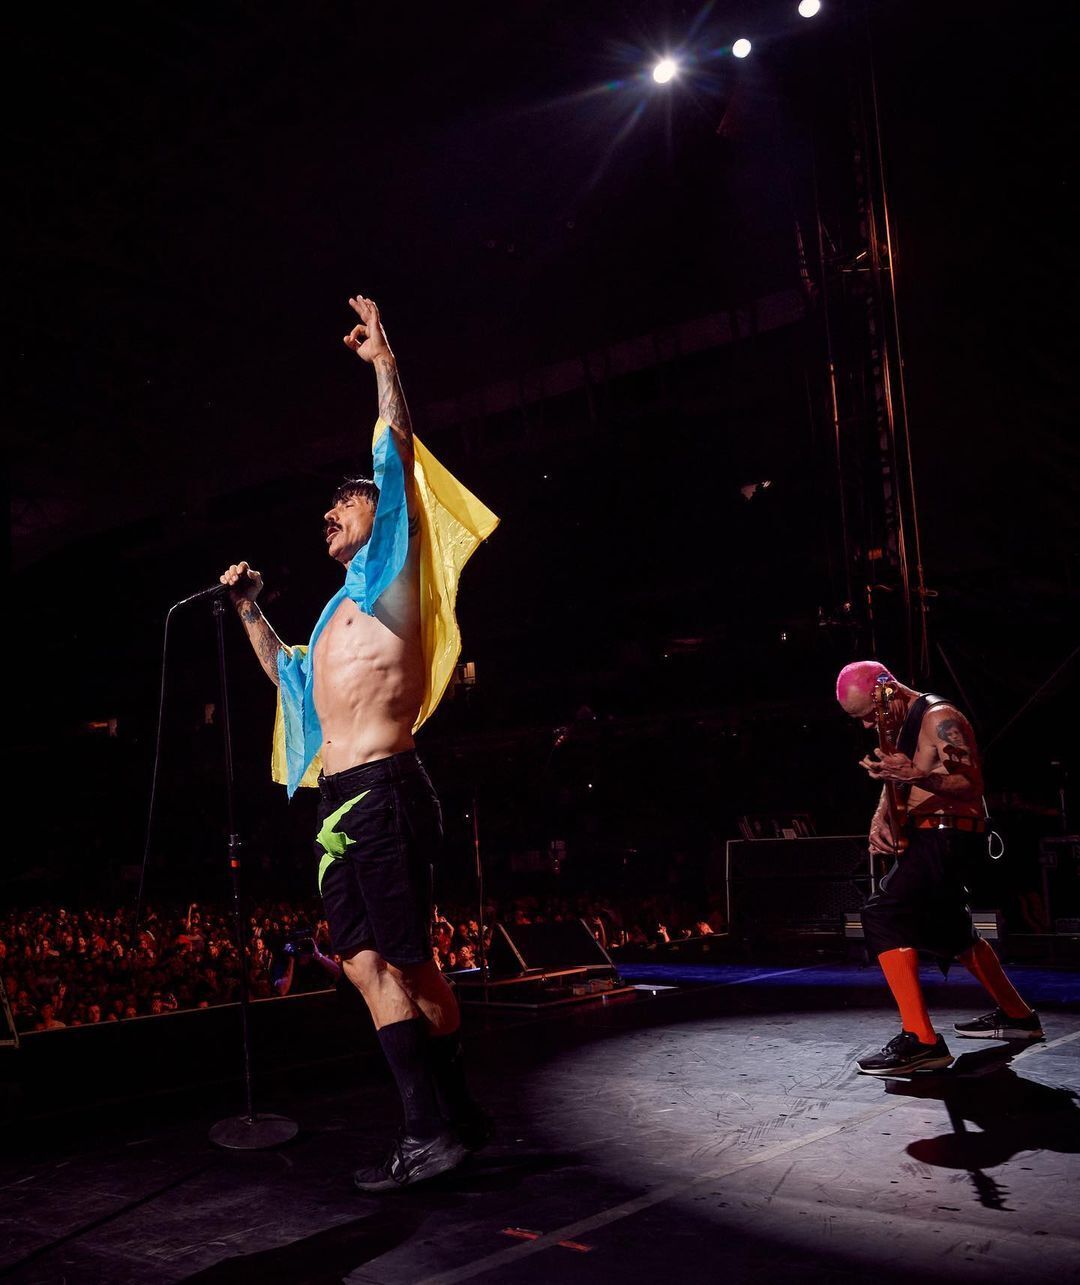 Paul McCartney, Rammstein and others: world stars who raised the flag of Ukraine at their concerts. Photo and video